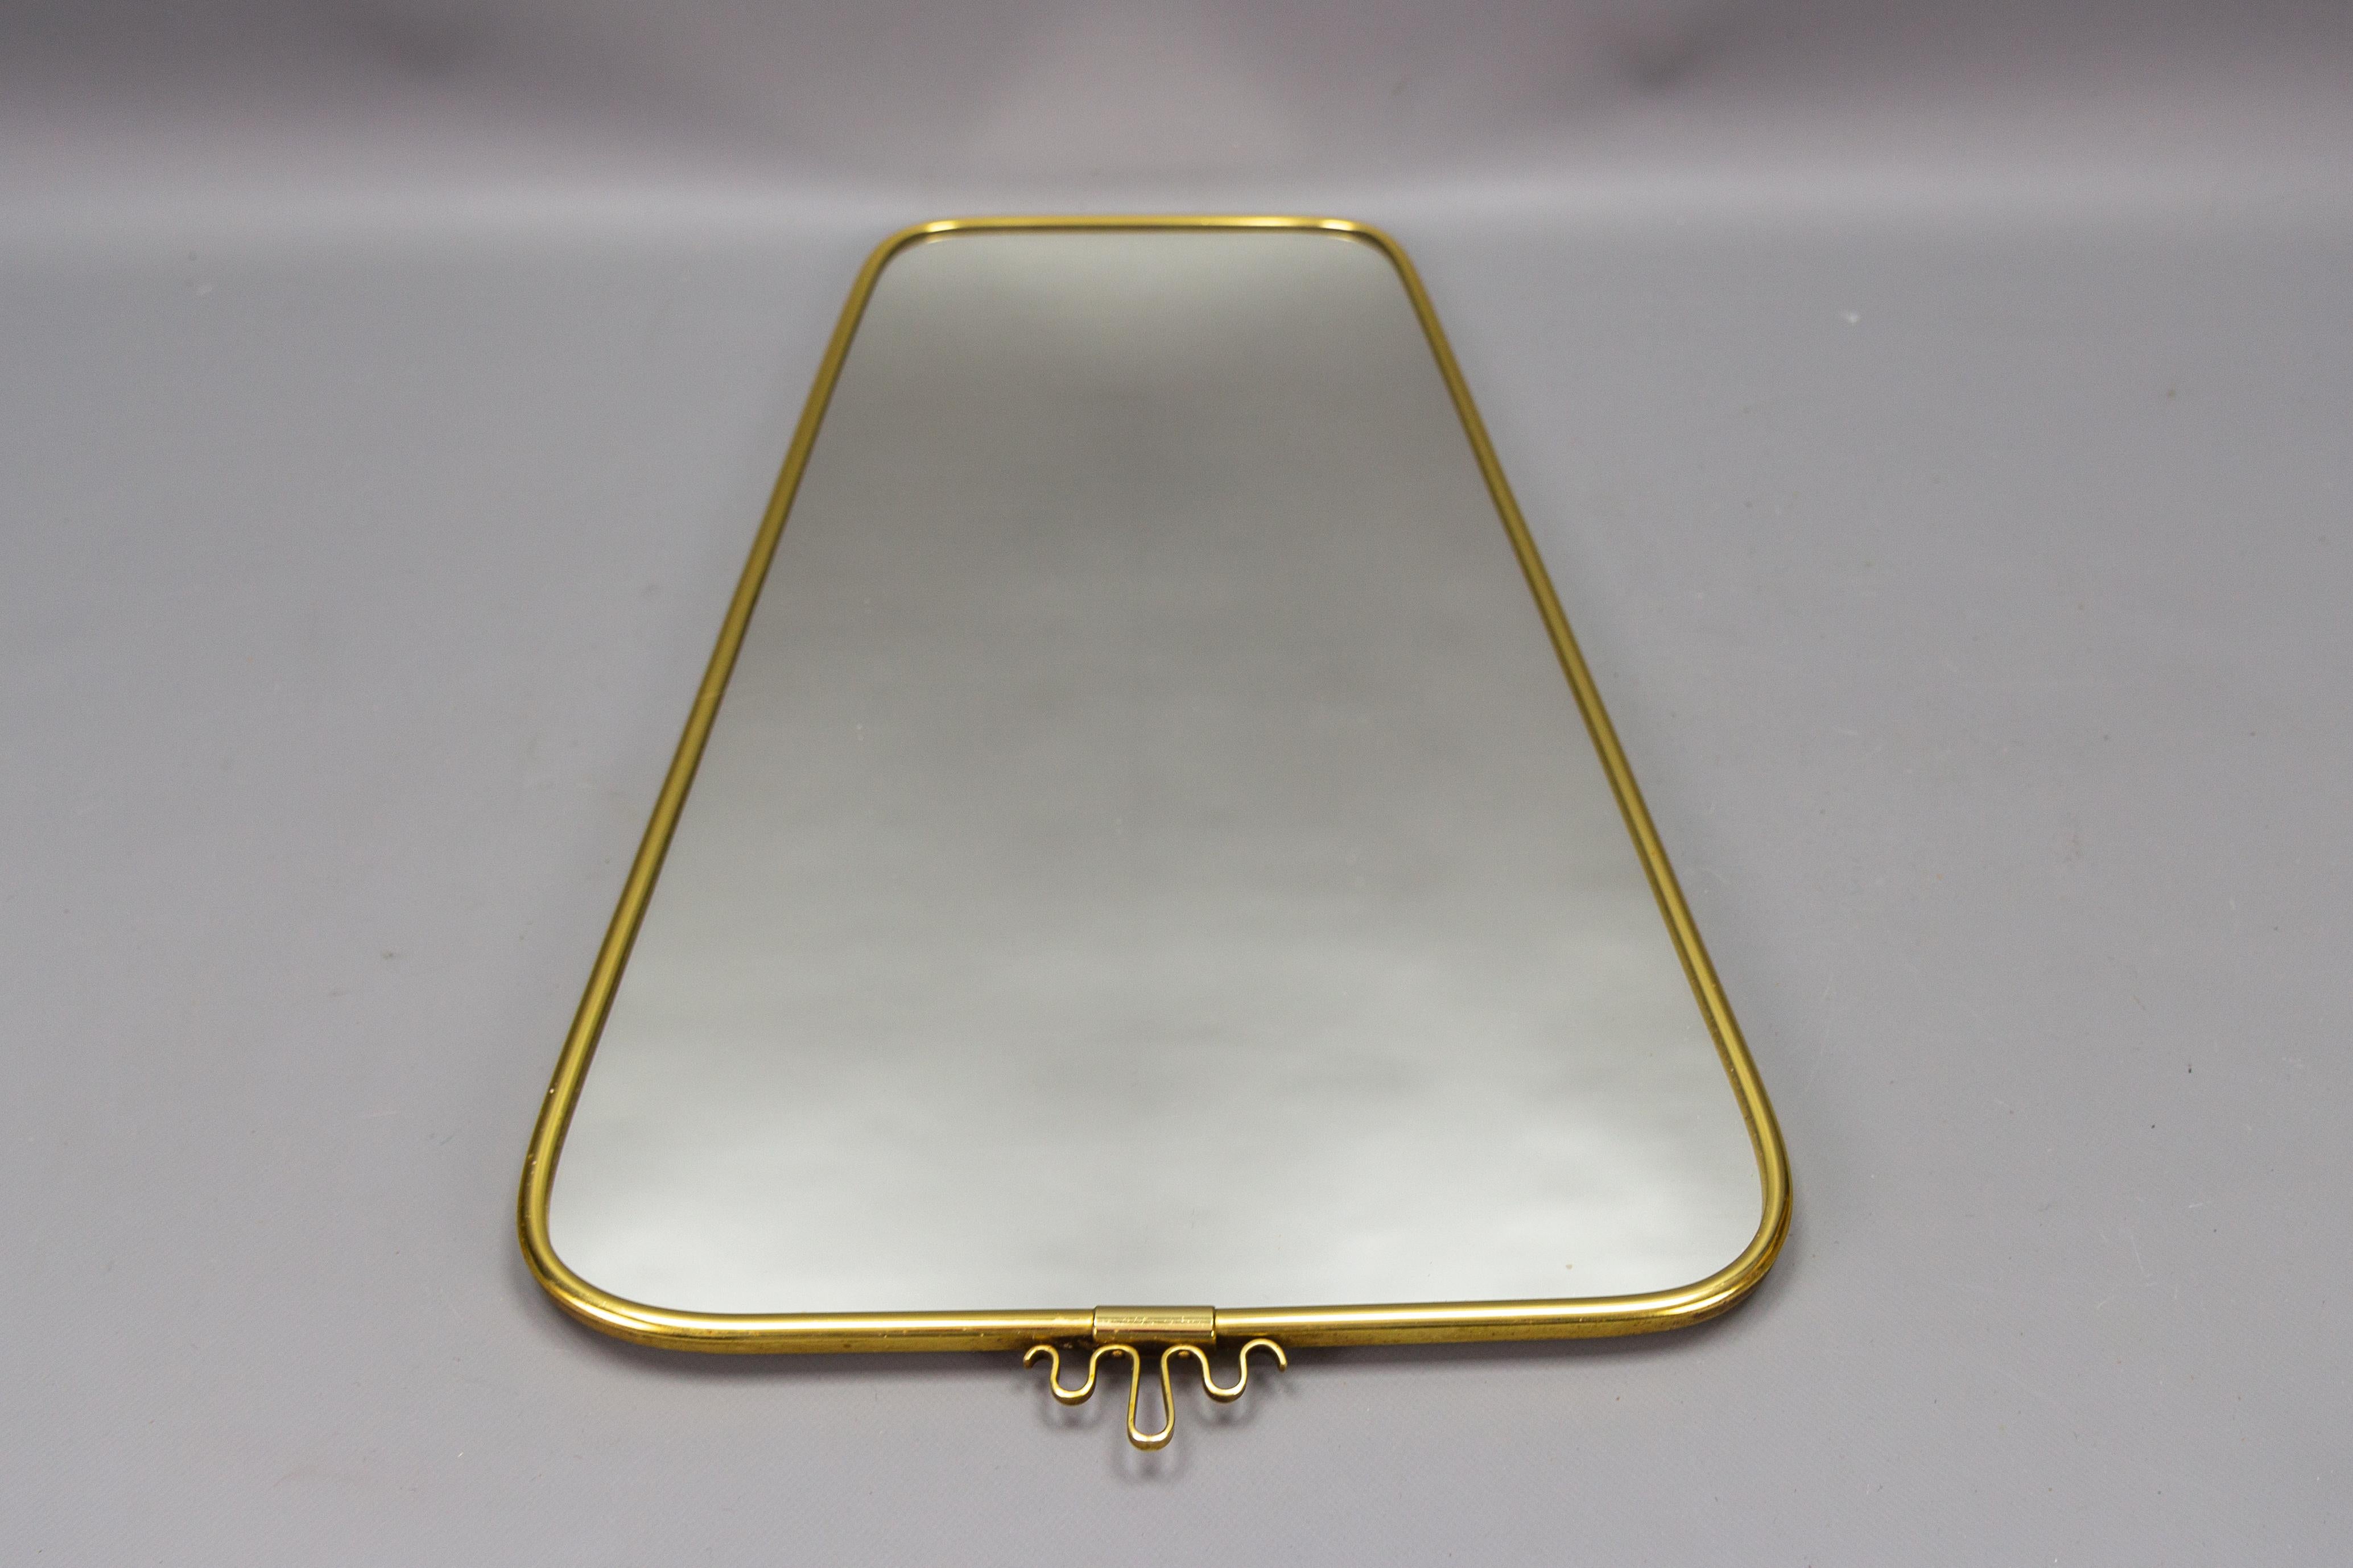 German Mid-Century Modern Brass Frame Wall Mirror by Lenzgold, 1960s For Sale 4